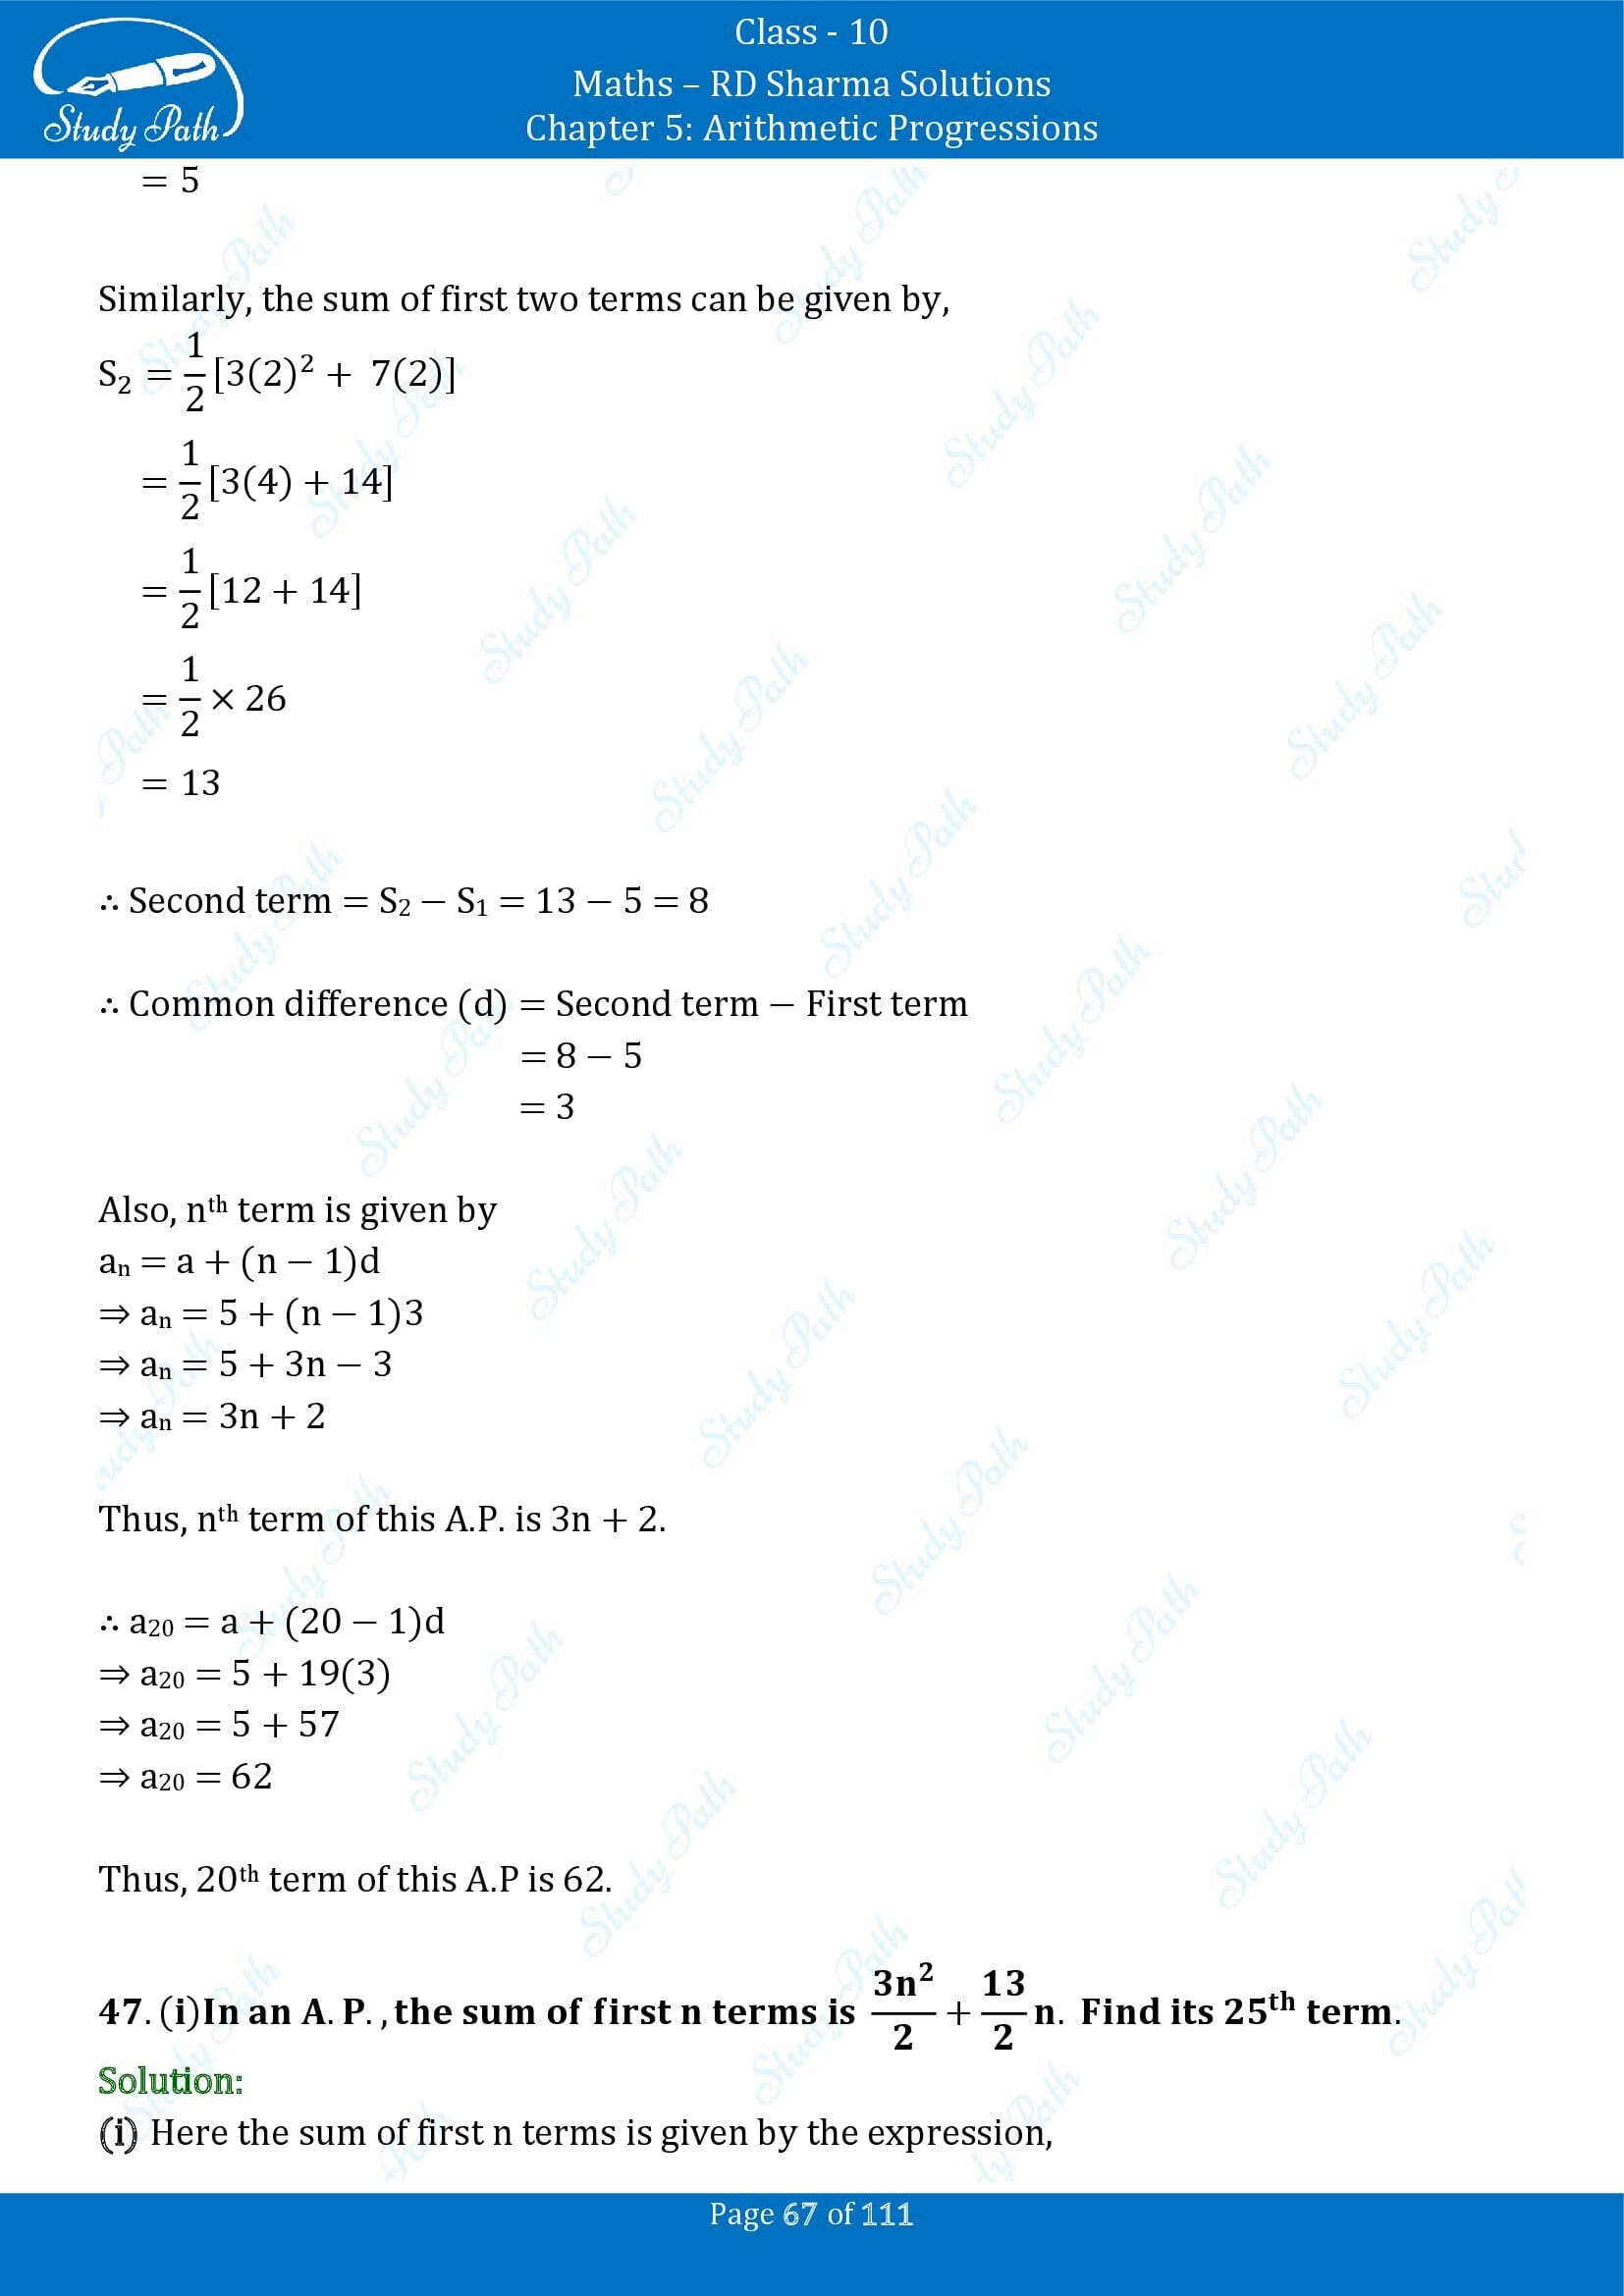 RD Sharma Solutions Class 10 Chapter 5 Arithmetic Progressions Exercise 5.6 00067